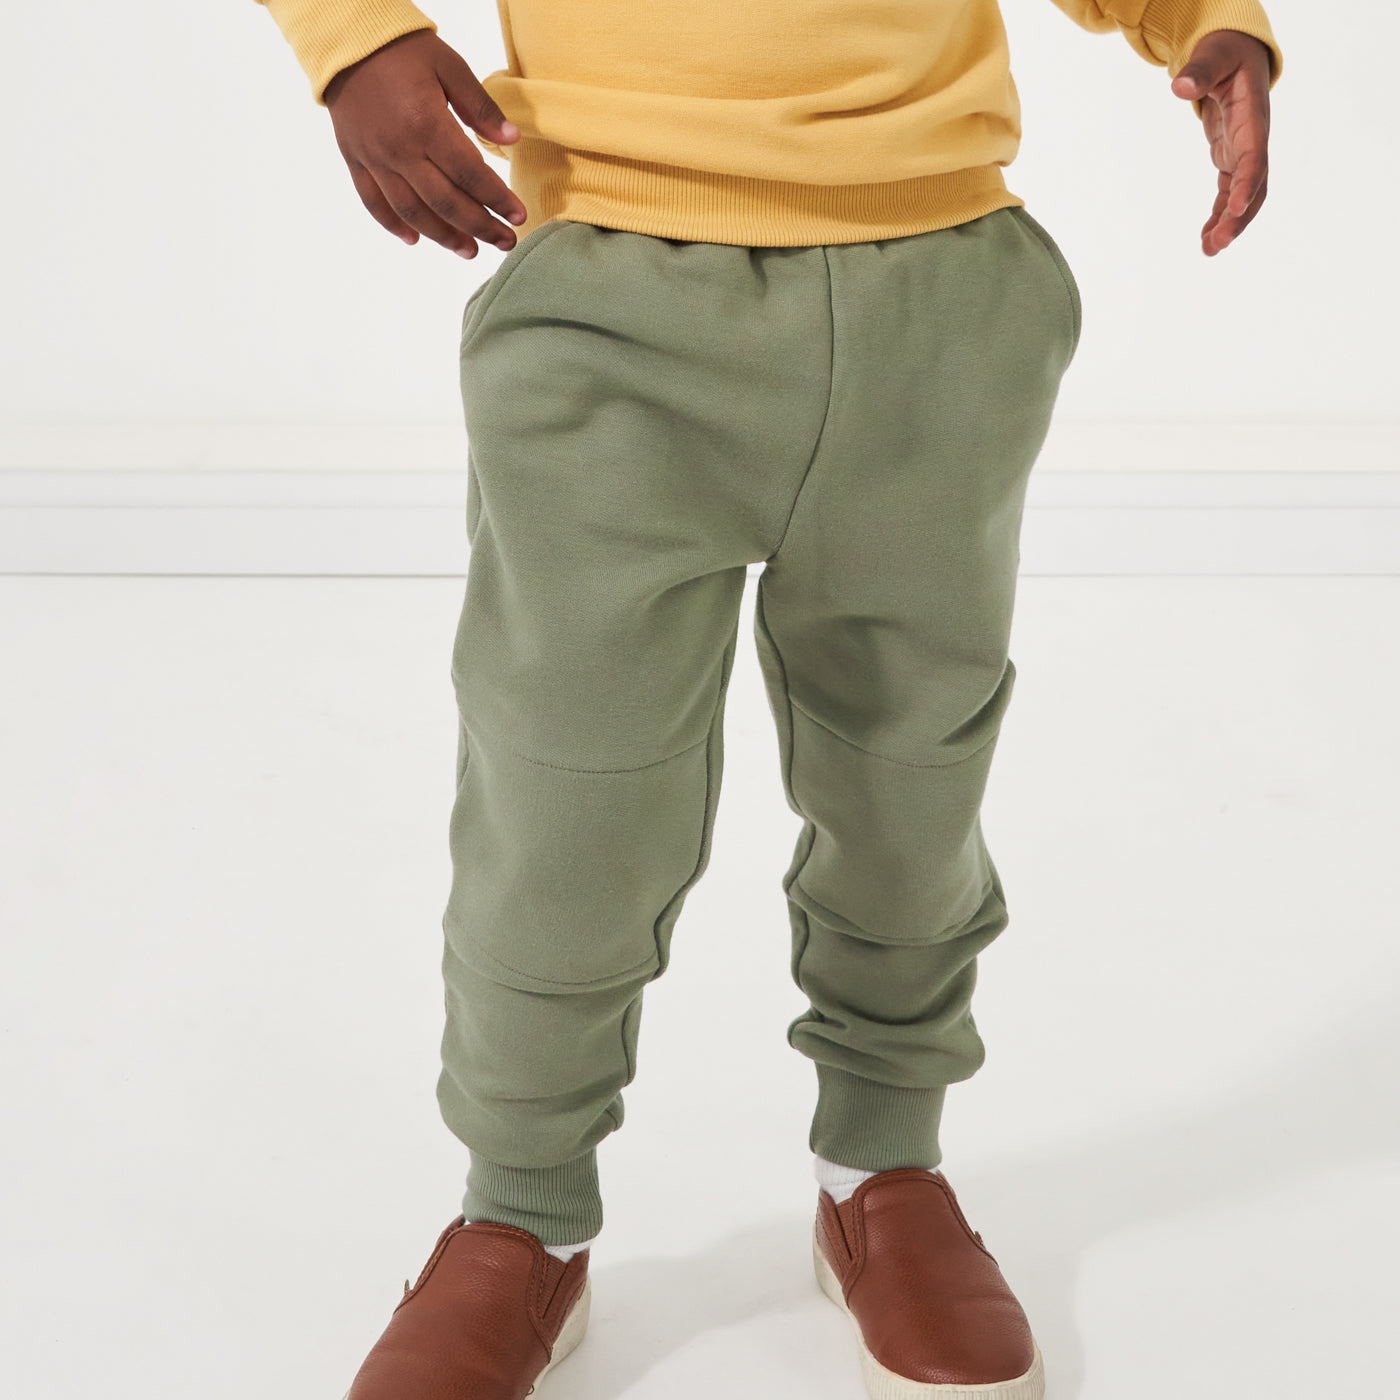 Close up image of a child wearing Moss joggers